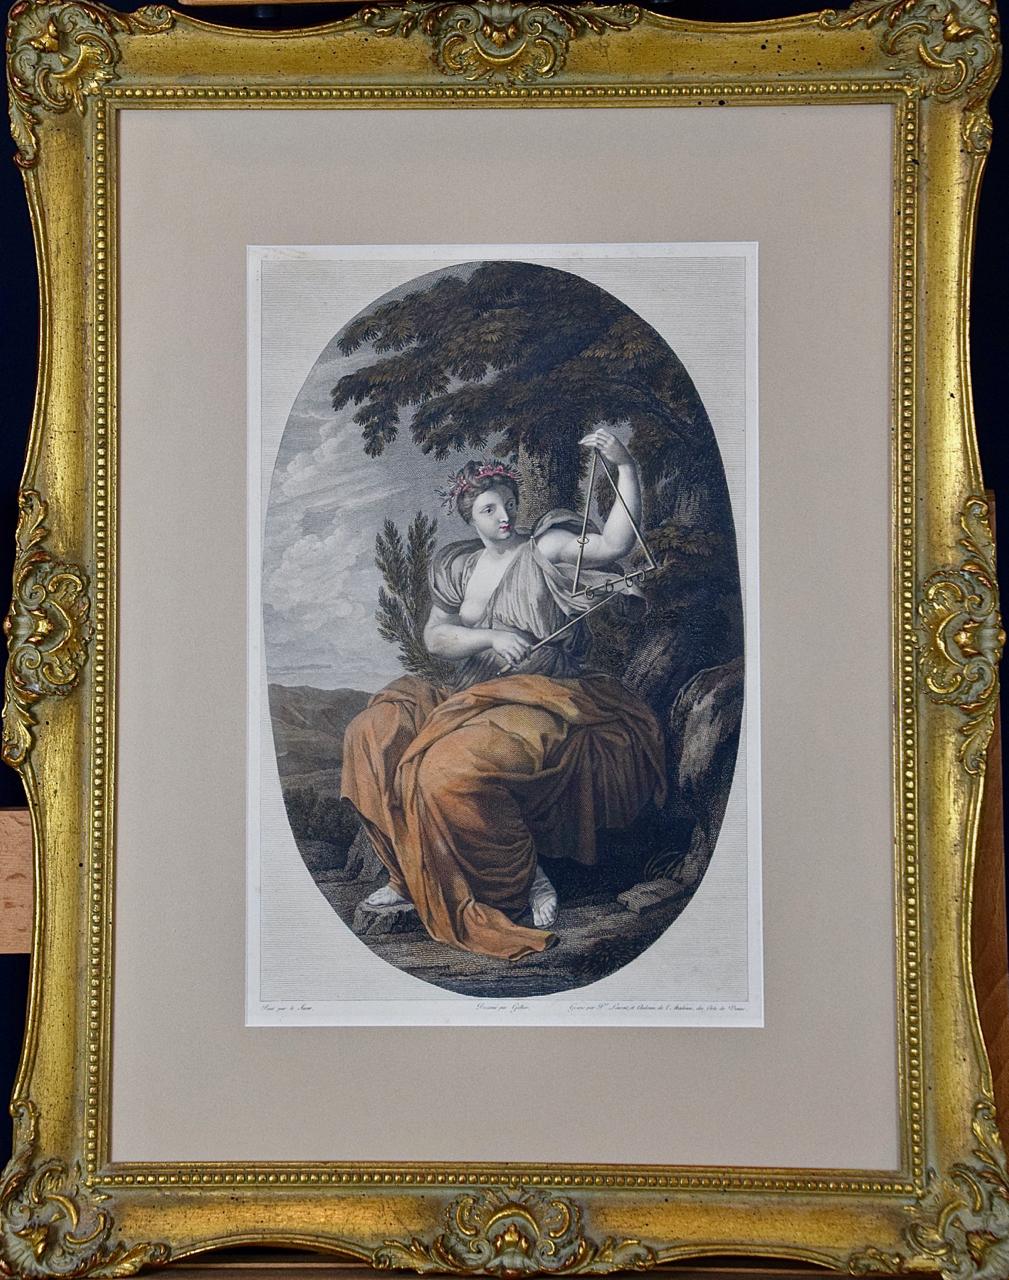 After Eustache Le Sueur Figurative Print - Muse Terpsichore: Framed Hand-colored 19th C. Engraving after 17th C. Painting 